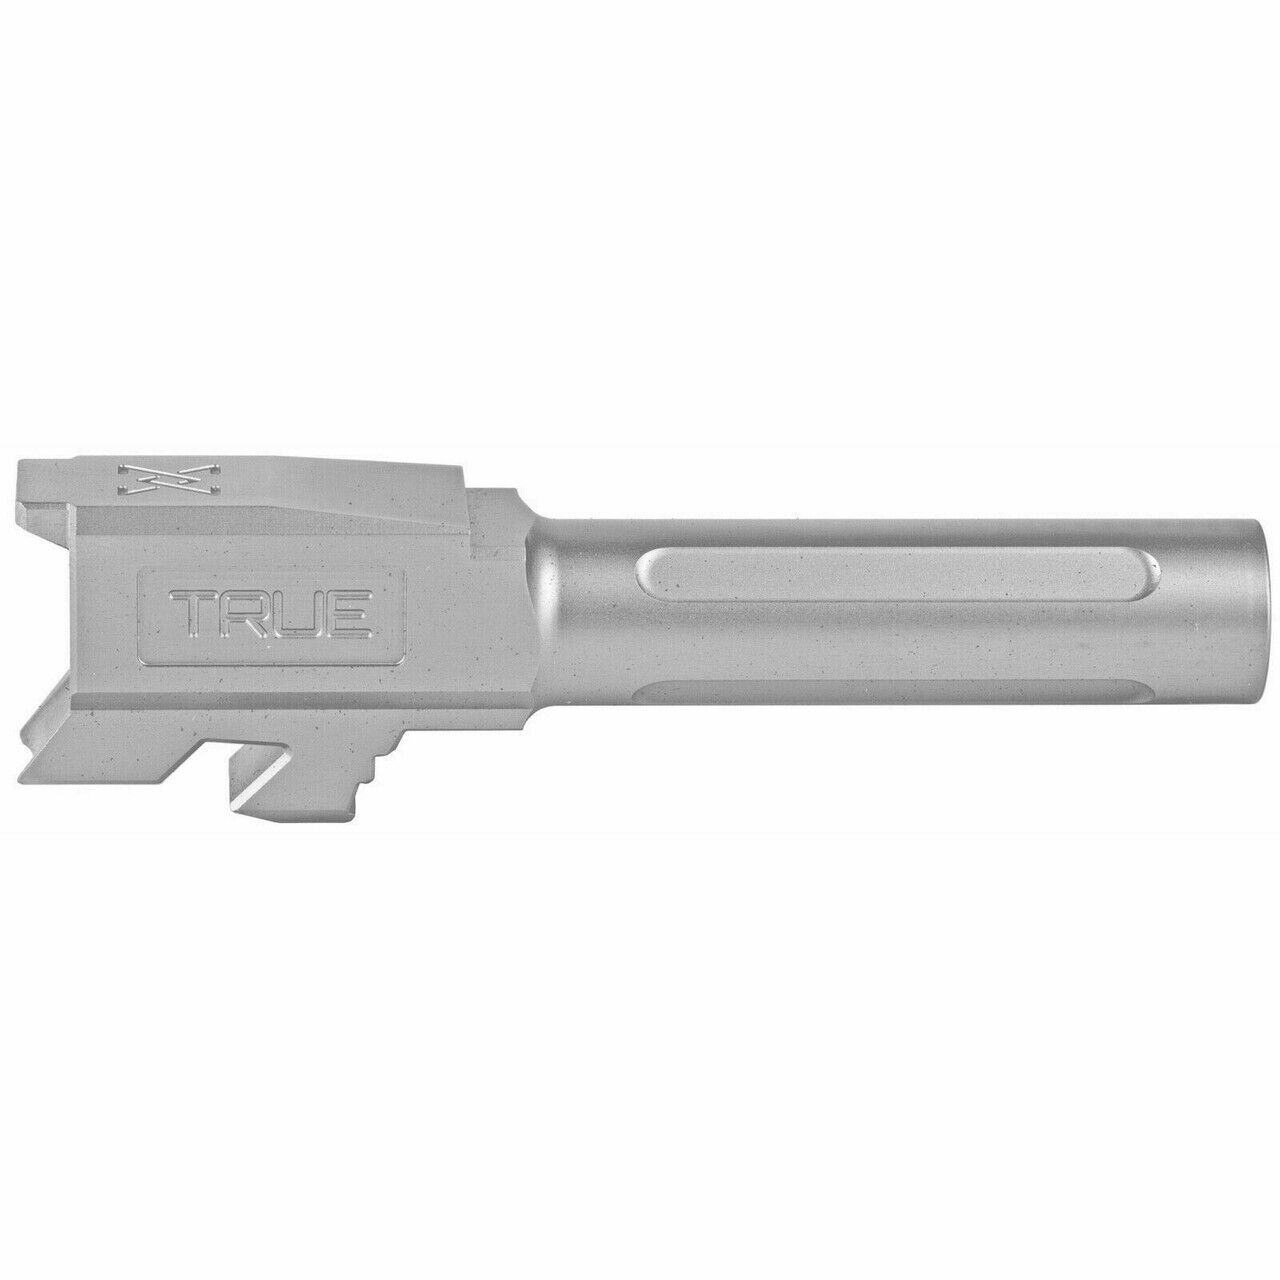 True Precision 9MM Non-Threaded Glock 43, Drop-In Barrel, Stainless Finish